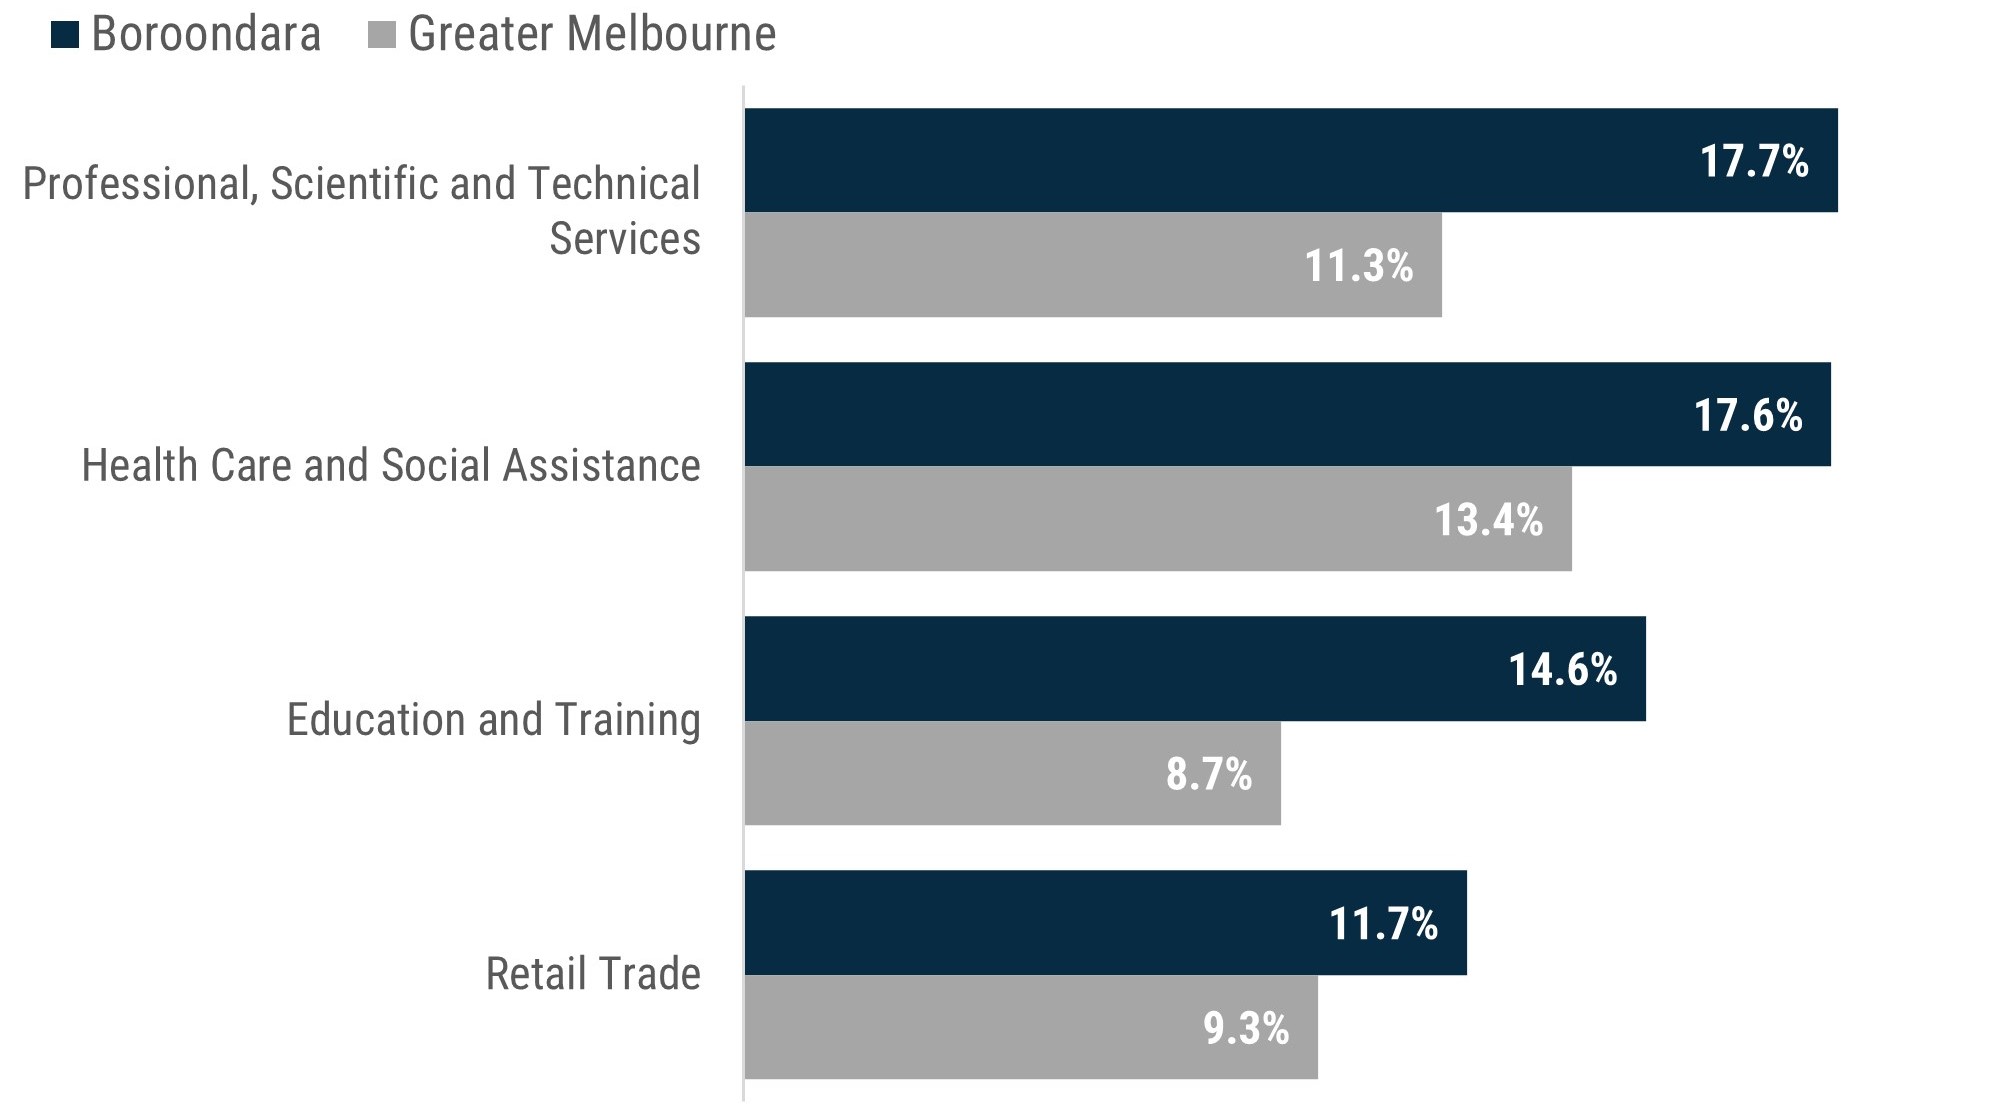 Bar graph shows the top 4 industries are Professional, Scientific and Technical Services (17.7% of workers), Health Care and Social Assistance (17.6%), Education and Training (14.6%) and Retail Trade (11.7%).